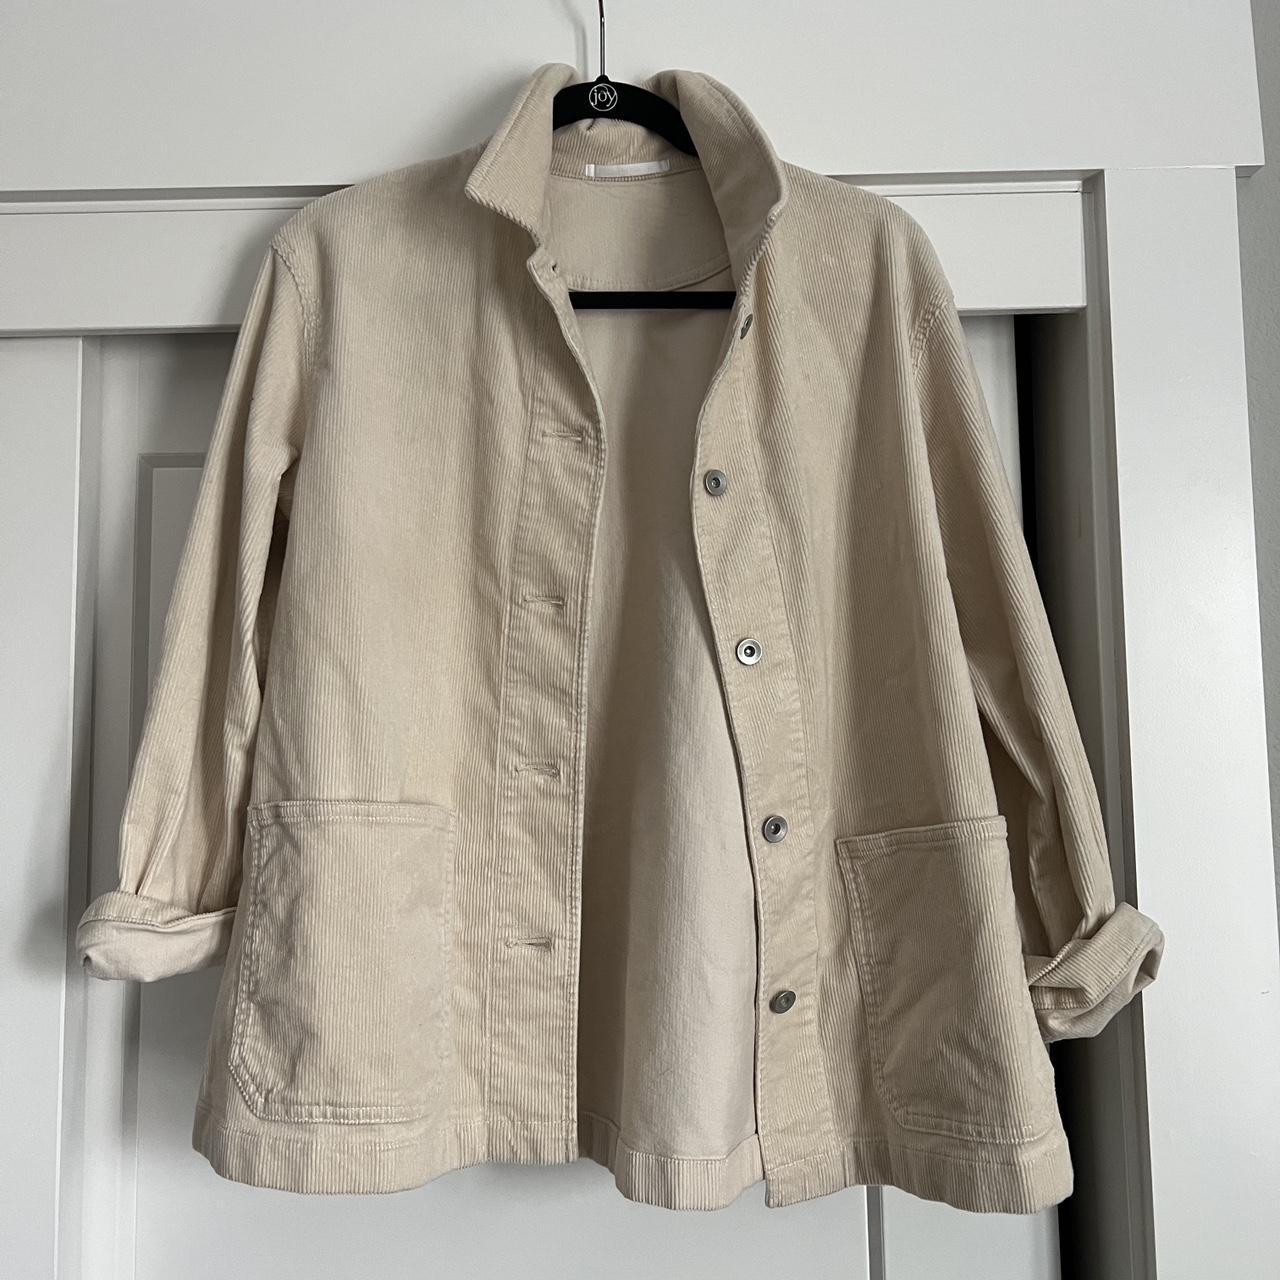 Uniqlo corduroy jacket in size S Only worn once! No... - Depop